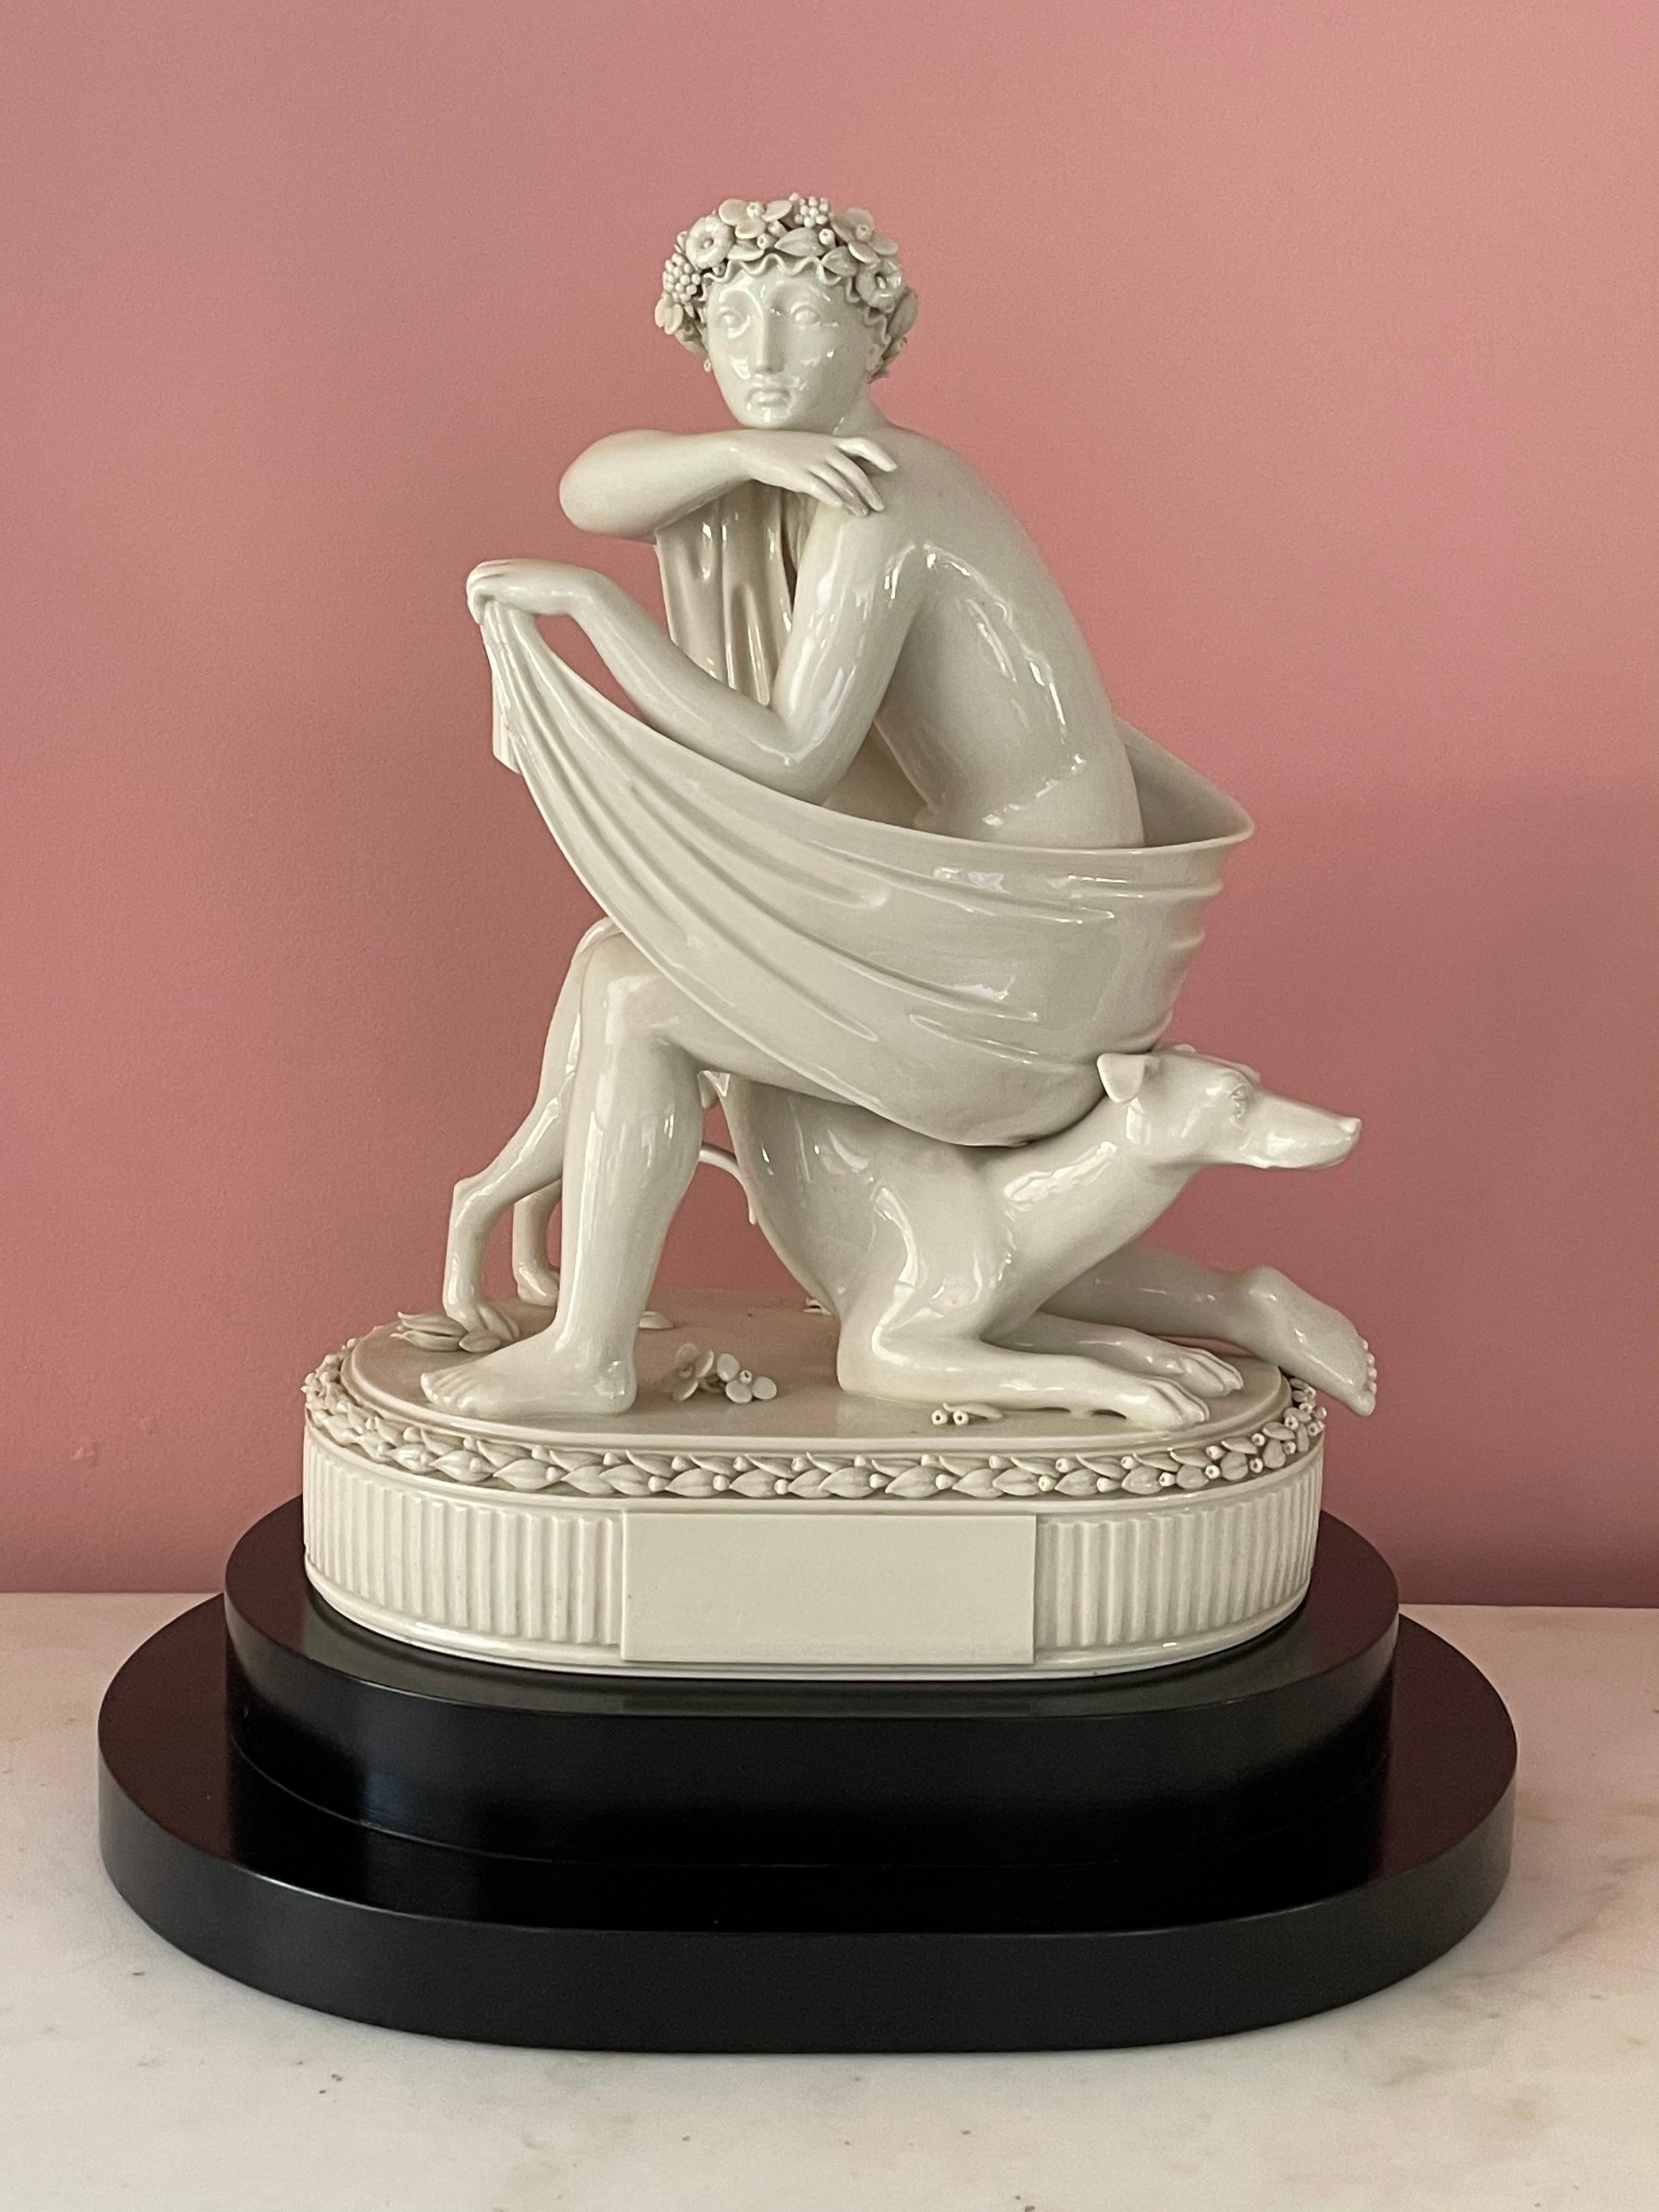 This 1927 Royal Copenhagen porcelain sculpture is exceptionally large in scale, and appears to represent an Amazon with her hound. It is remarkable for the juxtaposition of the simplified forms of her limbs and base, seen in the carefully detailed